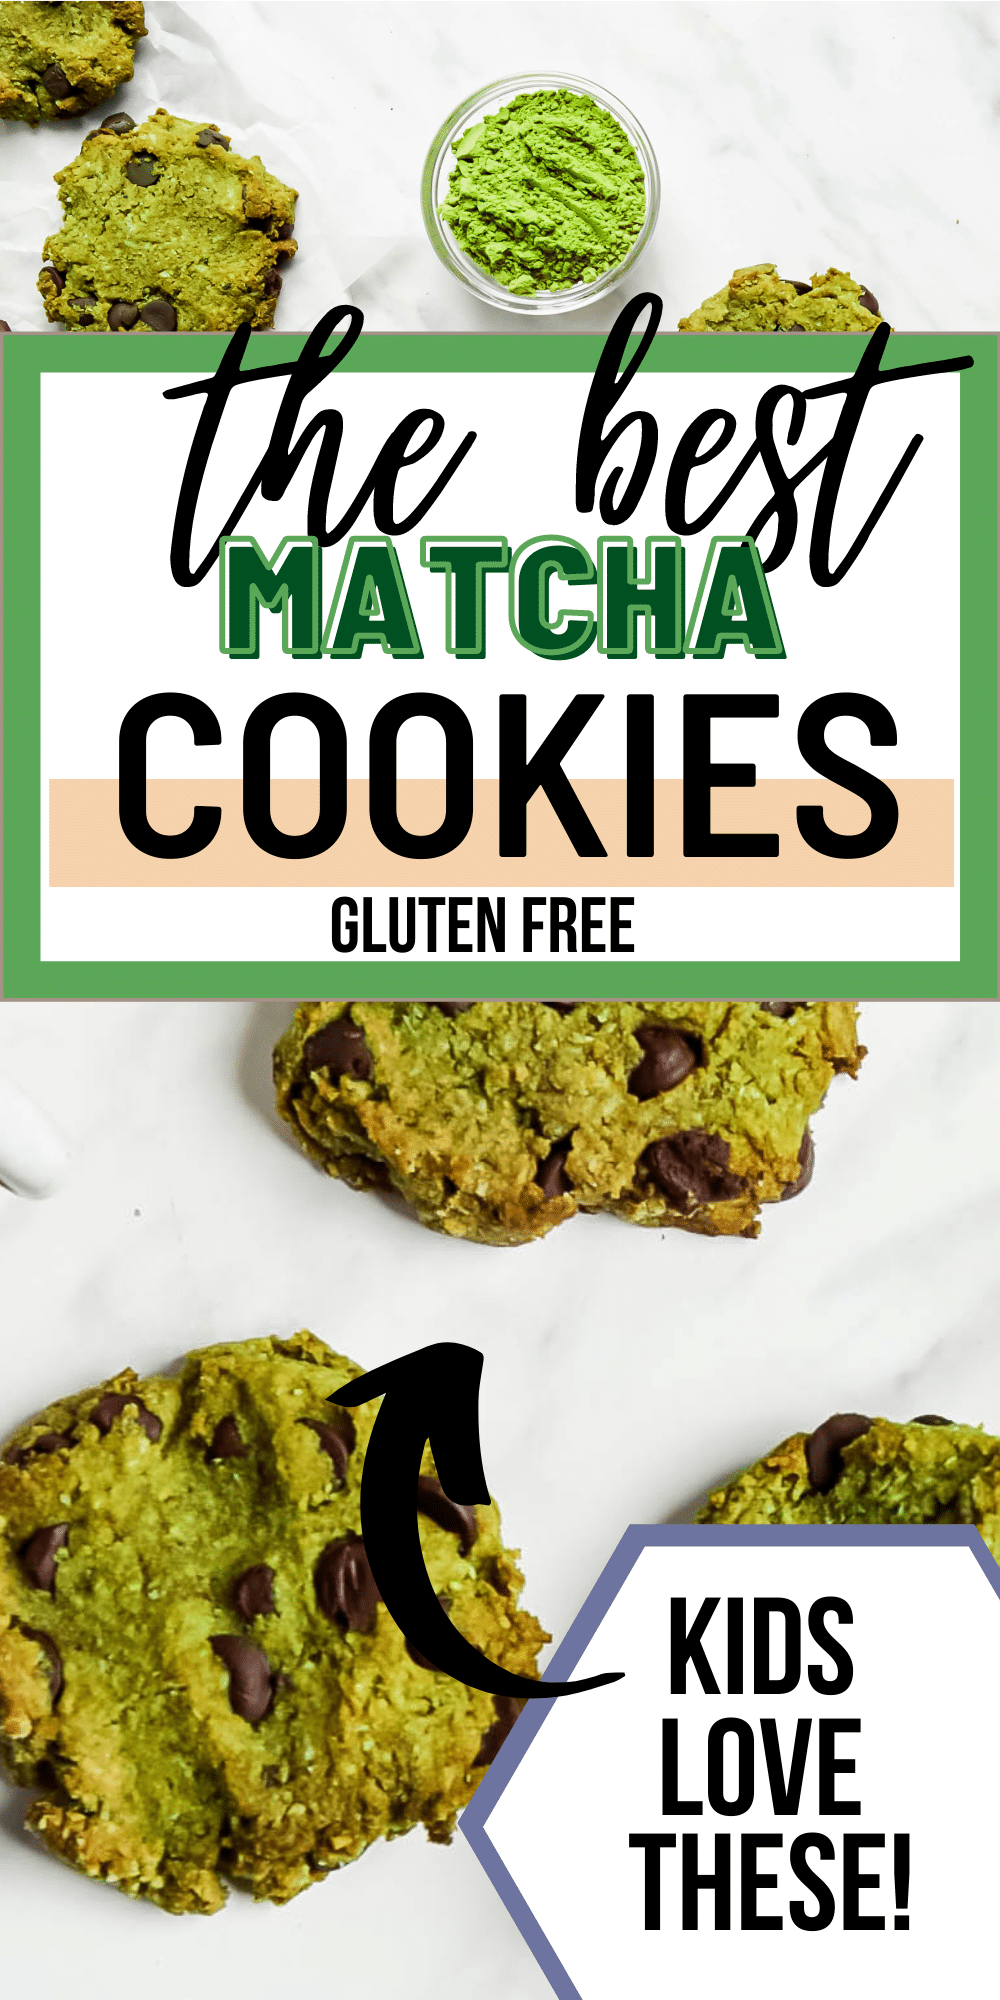 Matcha Chocolate Chip Cookies are packed with earthy green tea flavor and rich chocolate chips. These cookies are gluten free, refined sugar free and totally delicious. #cookies #matcha